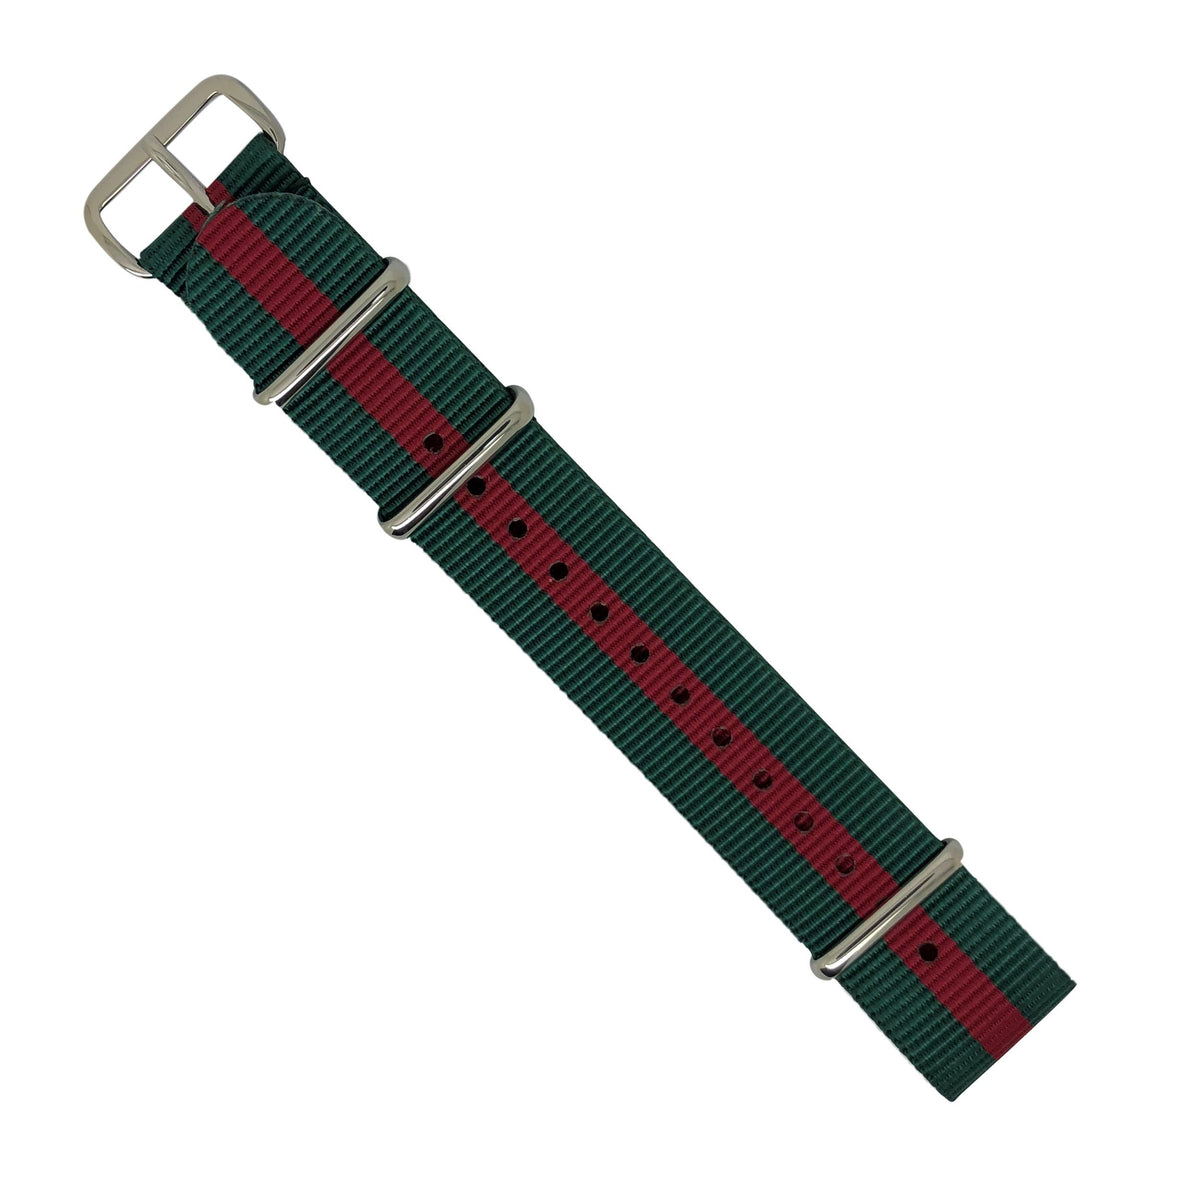 Premium Nato Strap in Green Red with Polished Silver Buckle (20mm) - Nomadstore Singapore